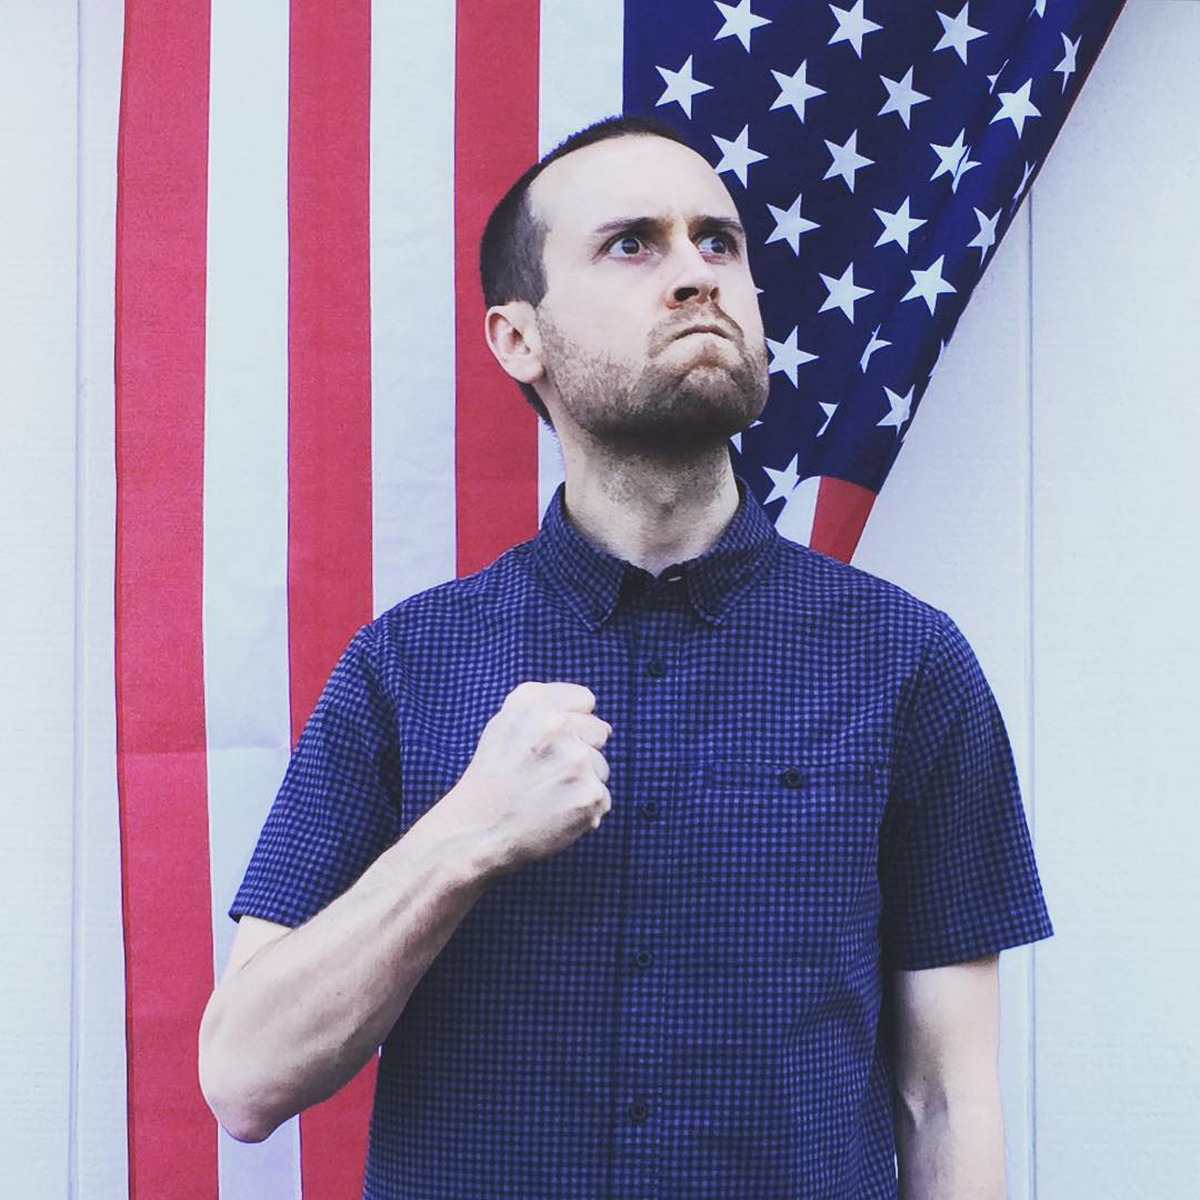 SeaNanners Gaming Channel